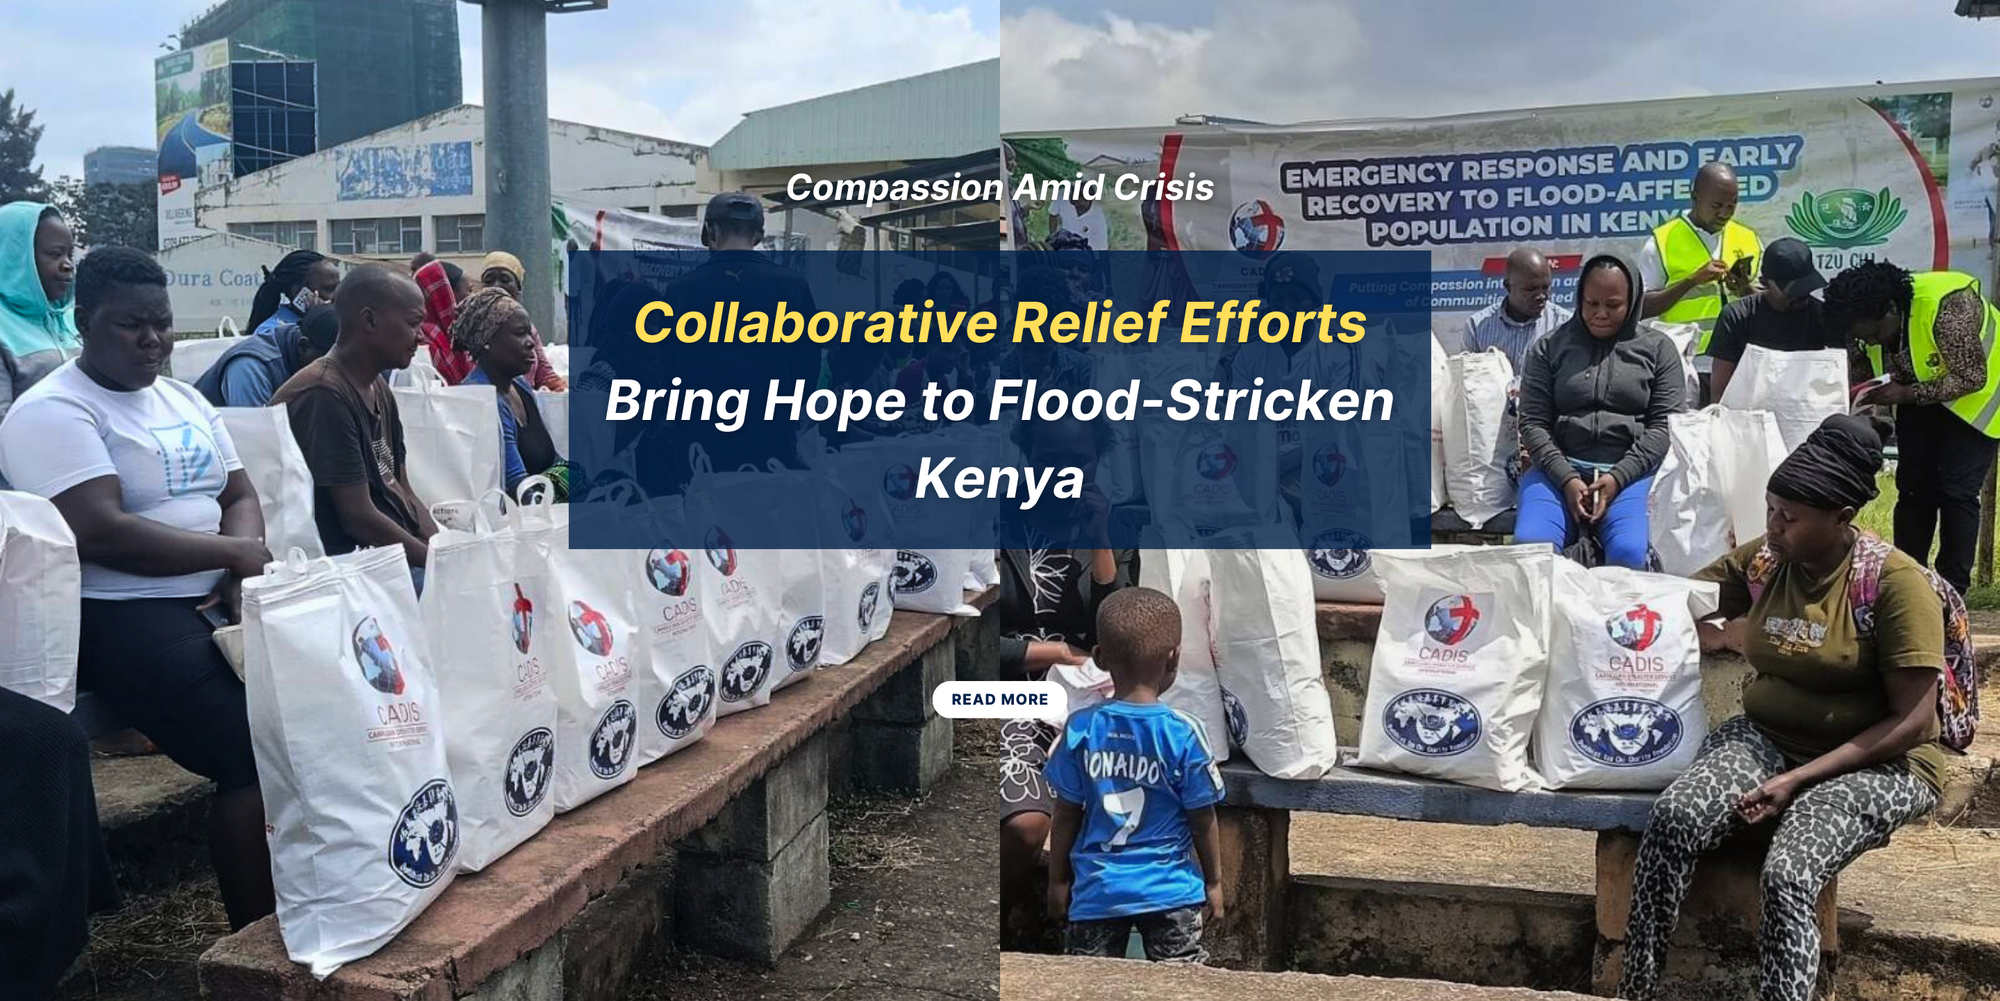 Compassion Amid Crisis: Collaborative Relief Efforts Bring Hope to Flood-Stricken Kenya